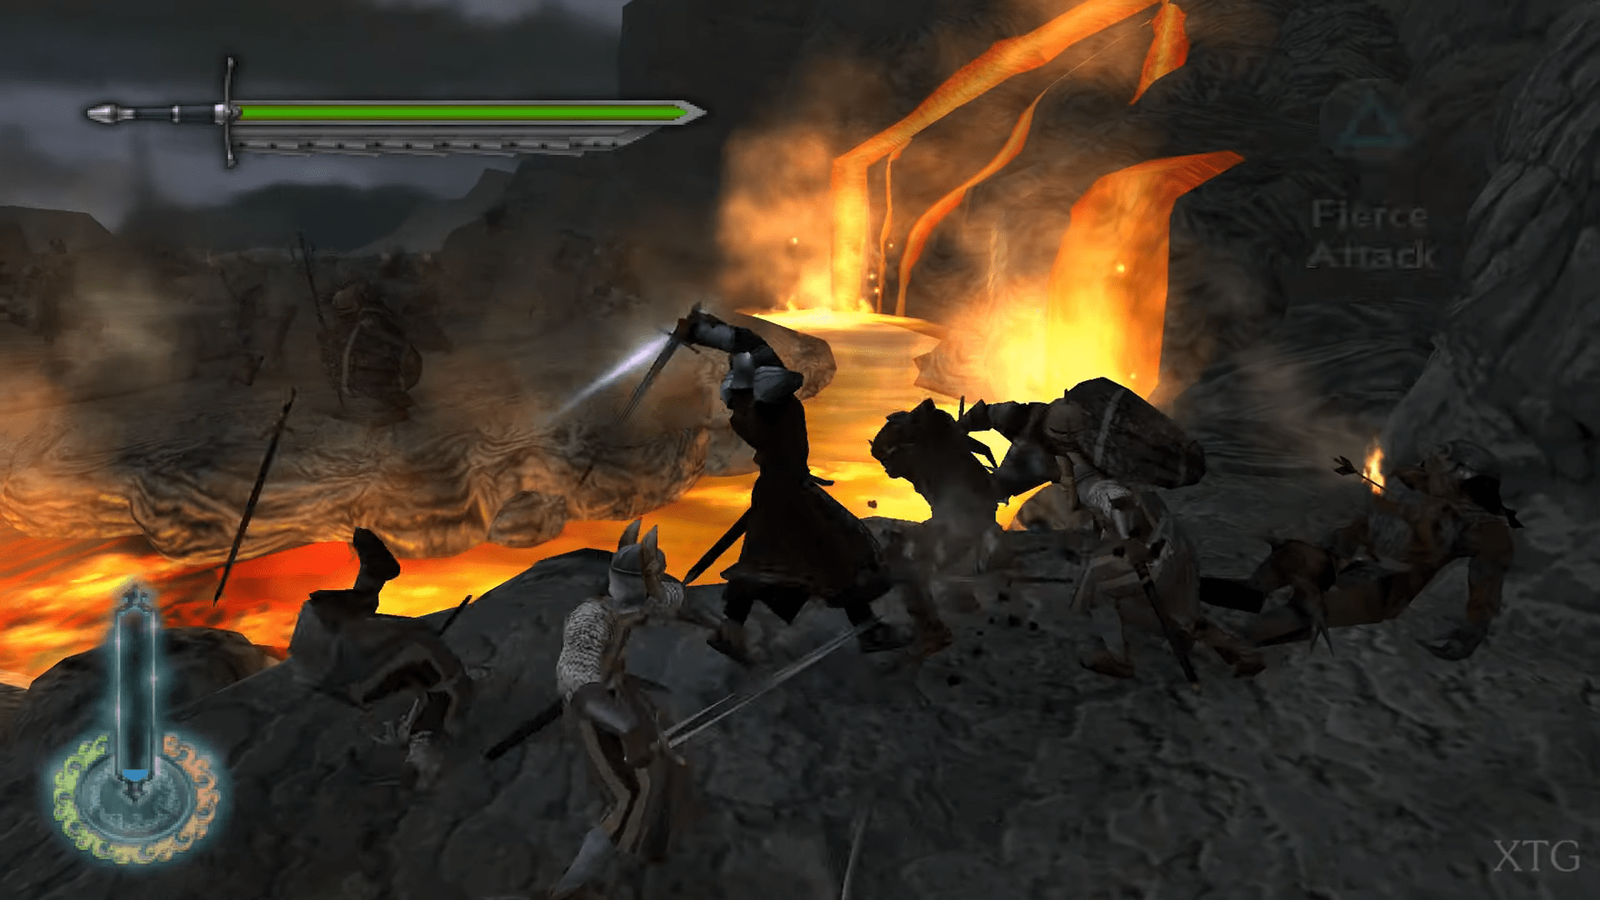 Combat in progress in The Lord of the Rings: The Two Towers.